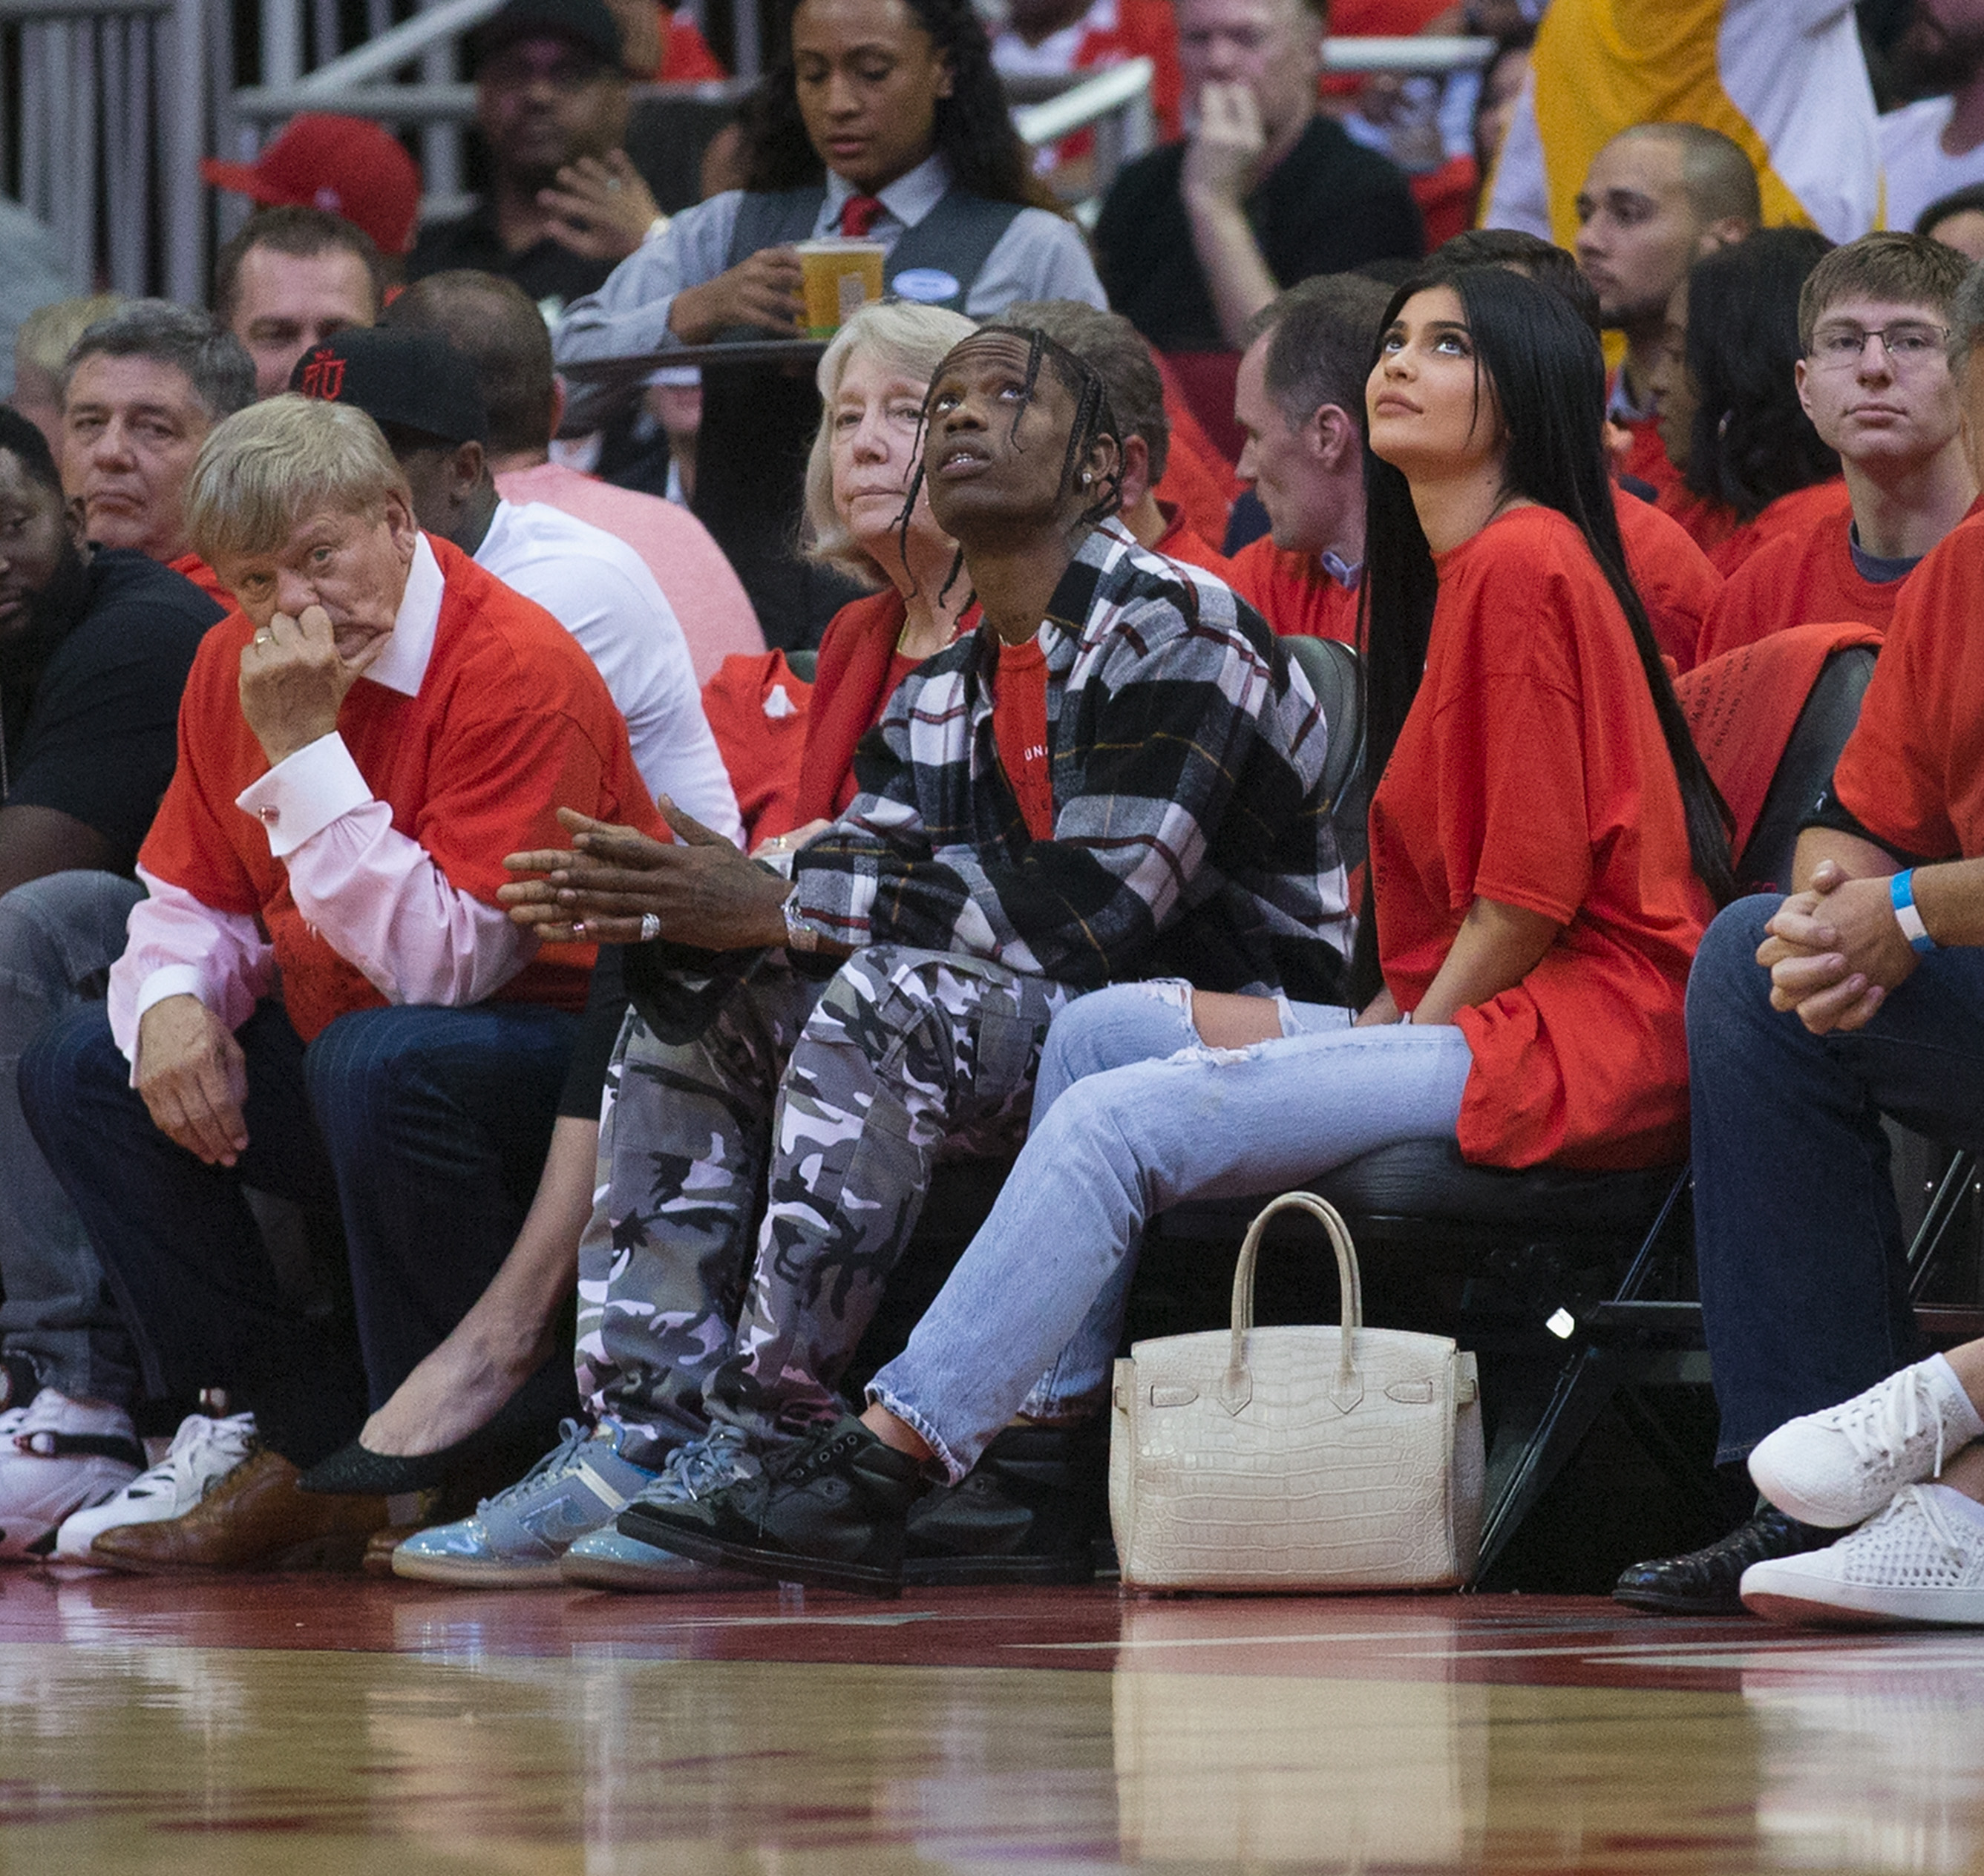 In rare public appearance, Travis Scott seen courtside at Houston